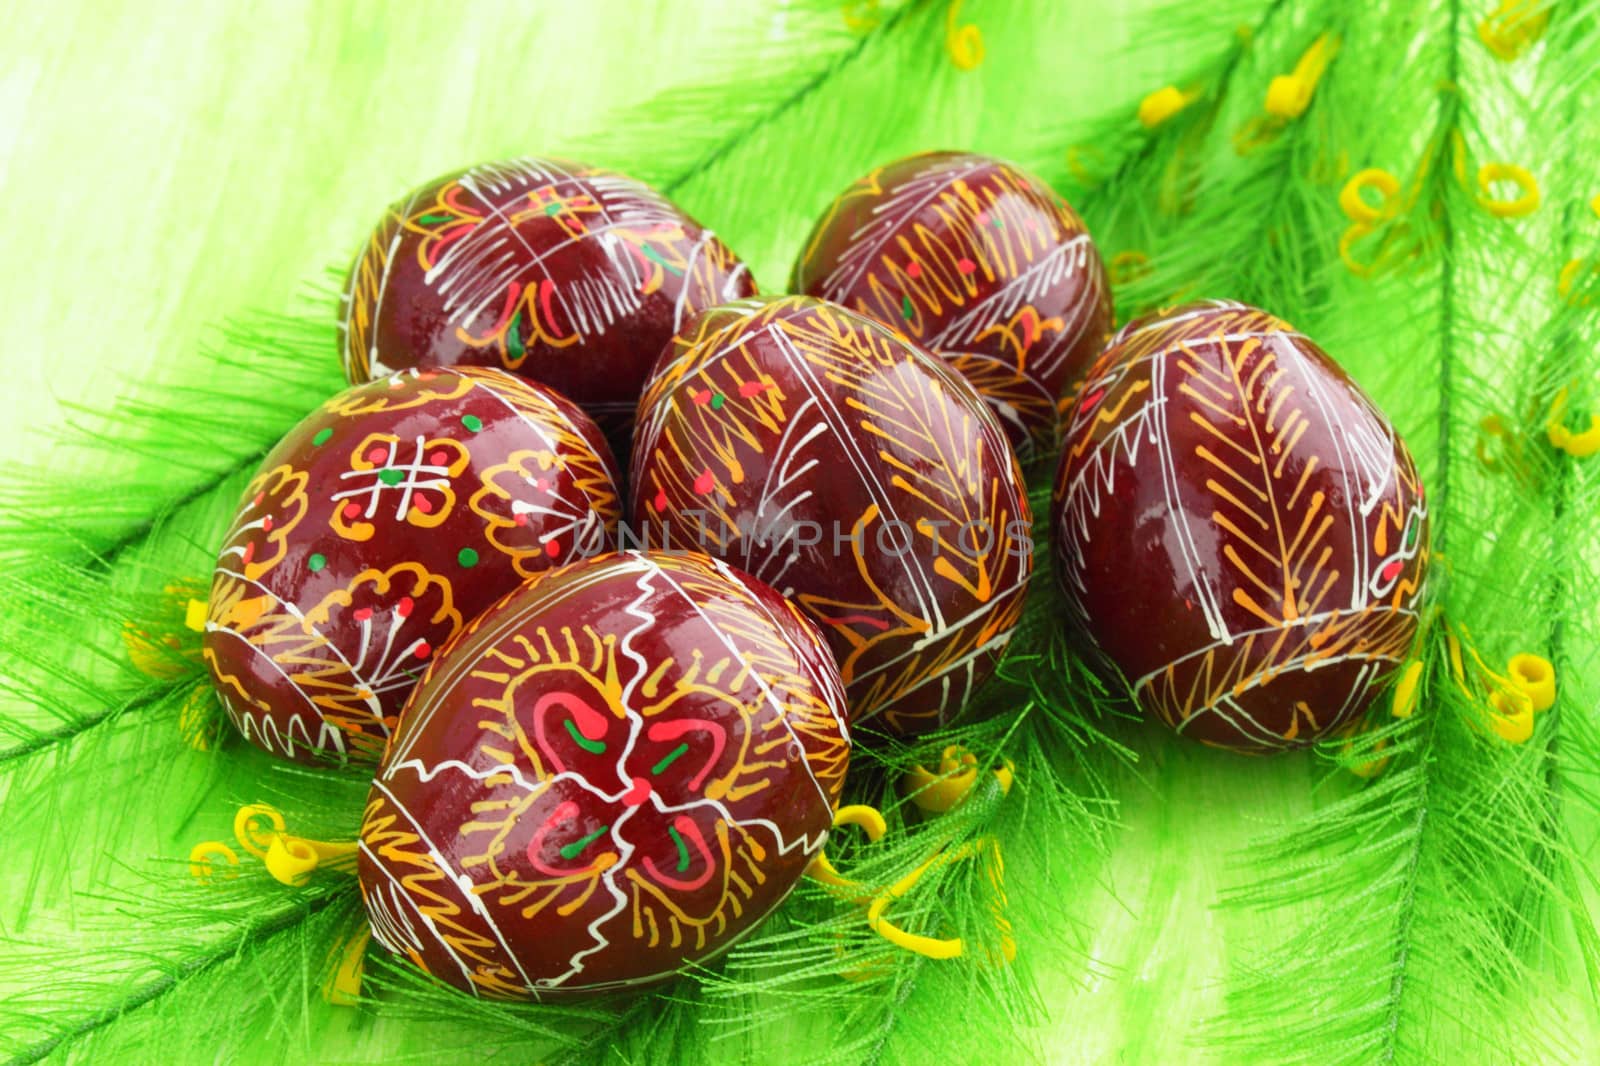 Easter eggs with the manual painting against the green background